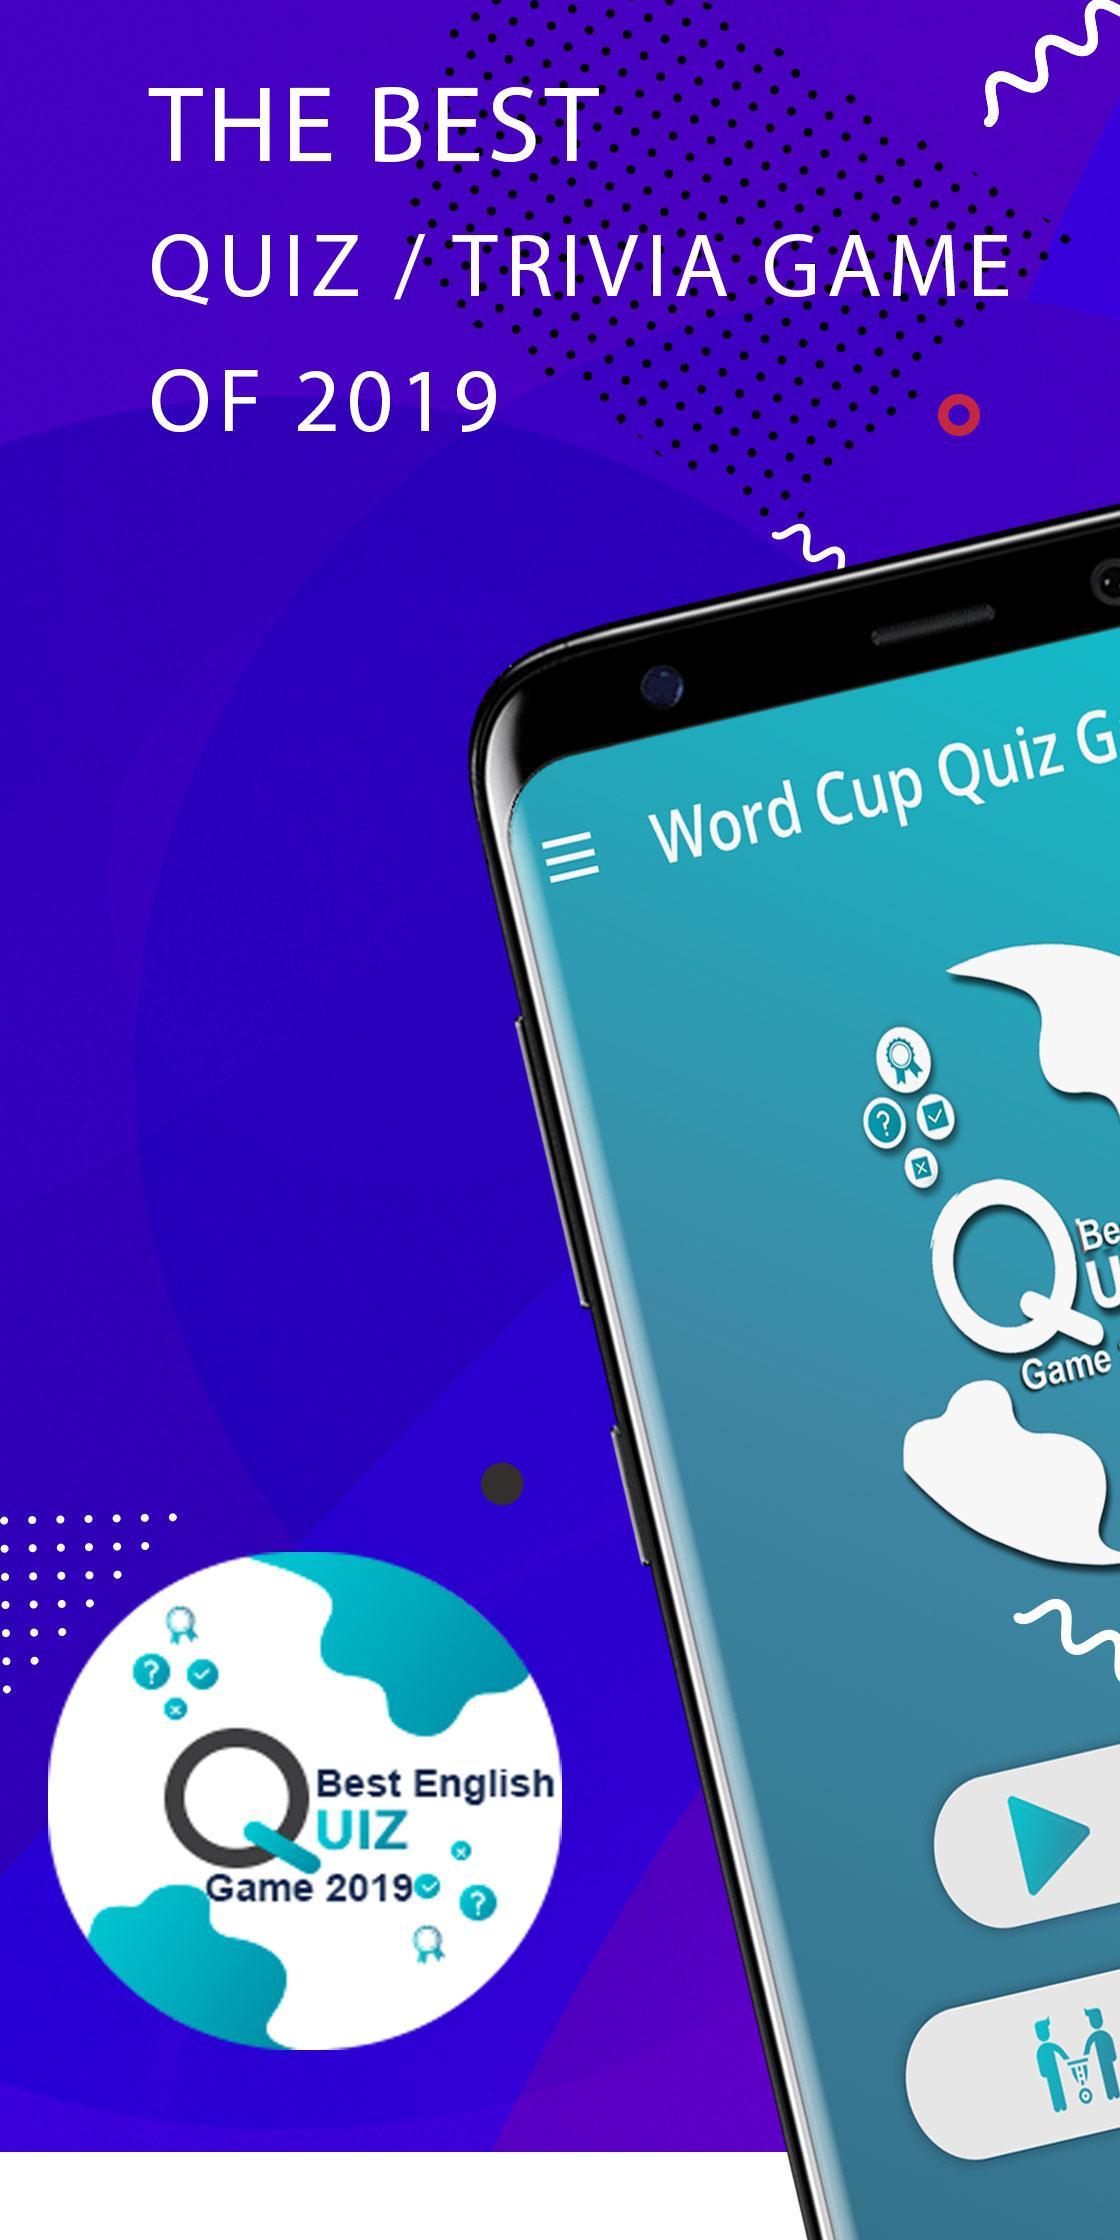 Word Games & Quiz with Friends - FREE 1.0.4 Screenshot 1